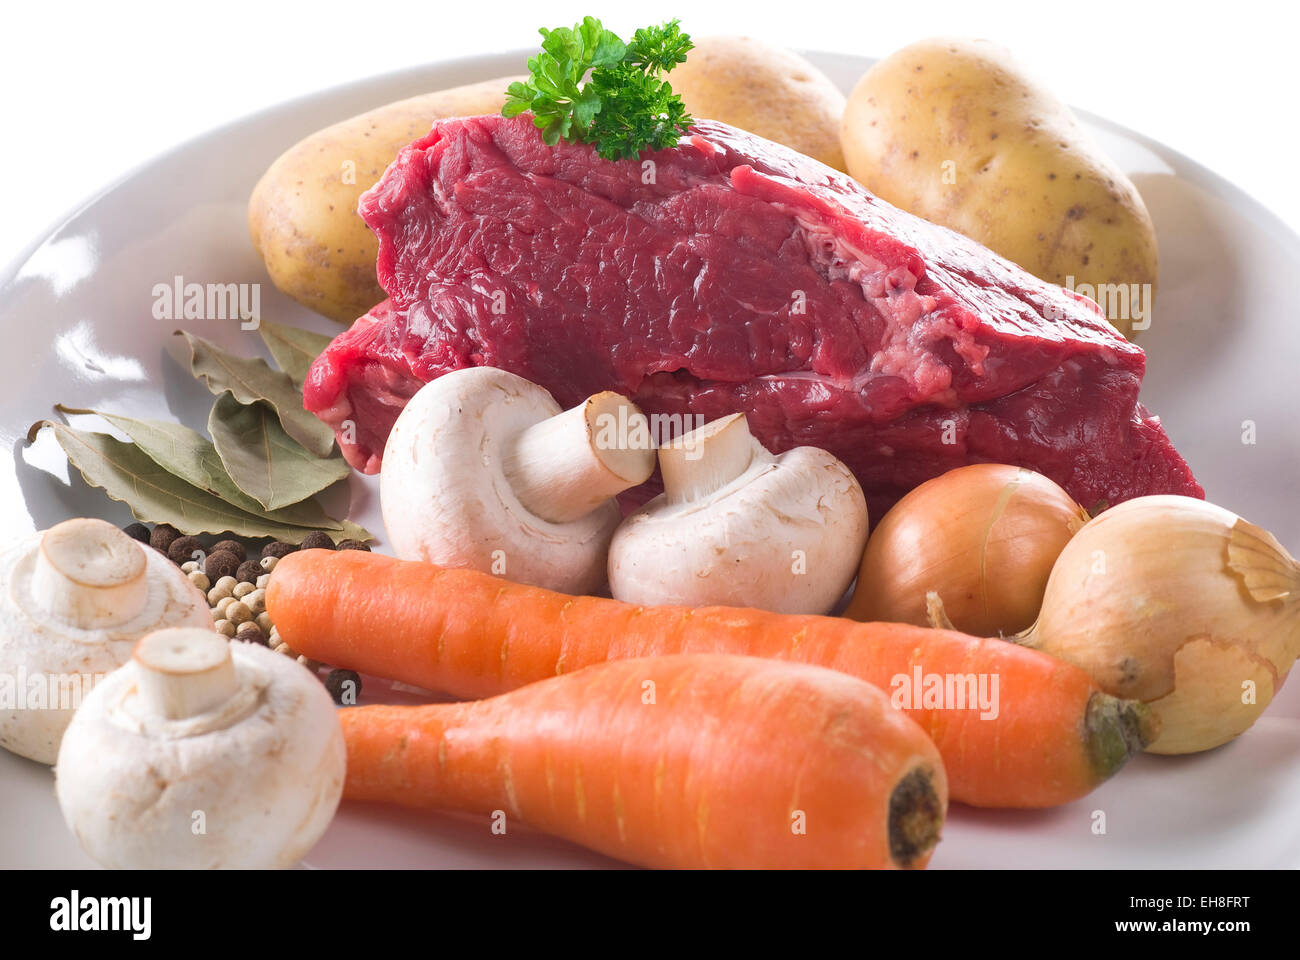 Fresh beef stew ingredients on a plate. Stock Photo